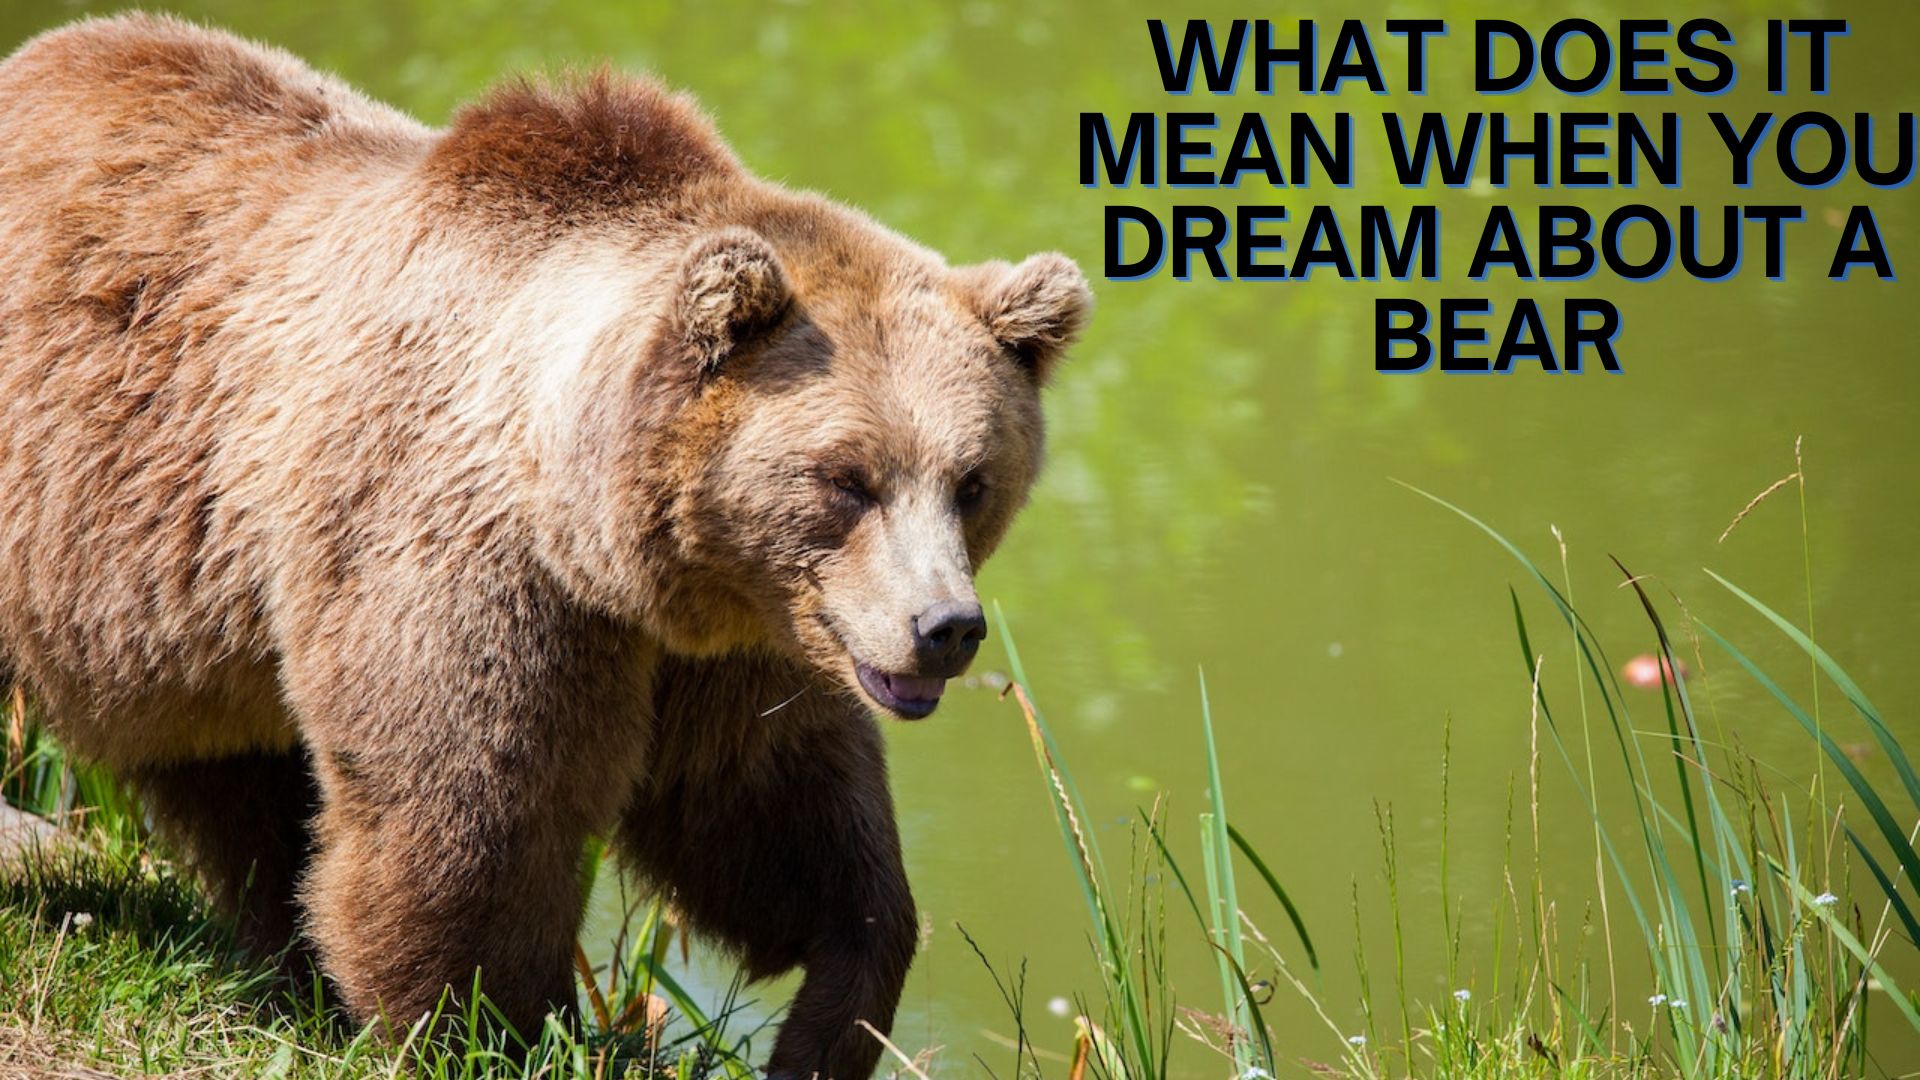 What Does It Mean When You Dream About A Bear?